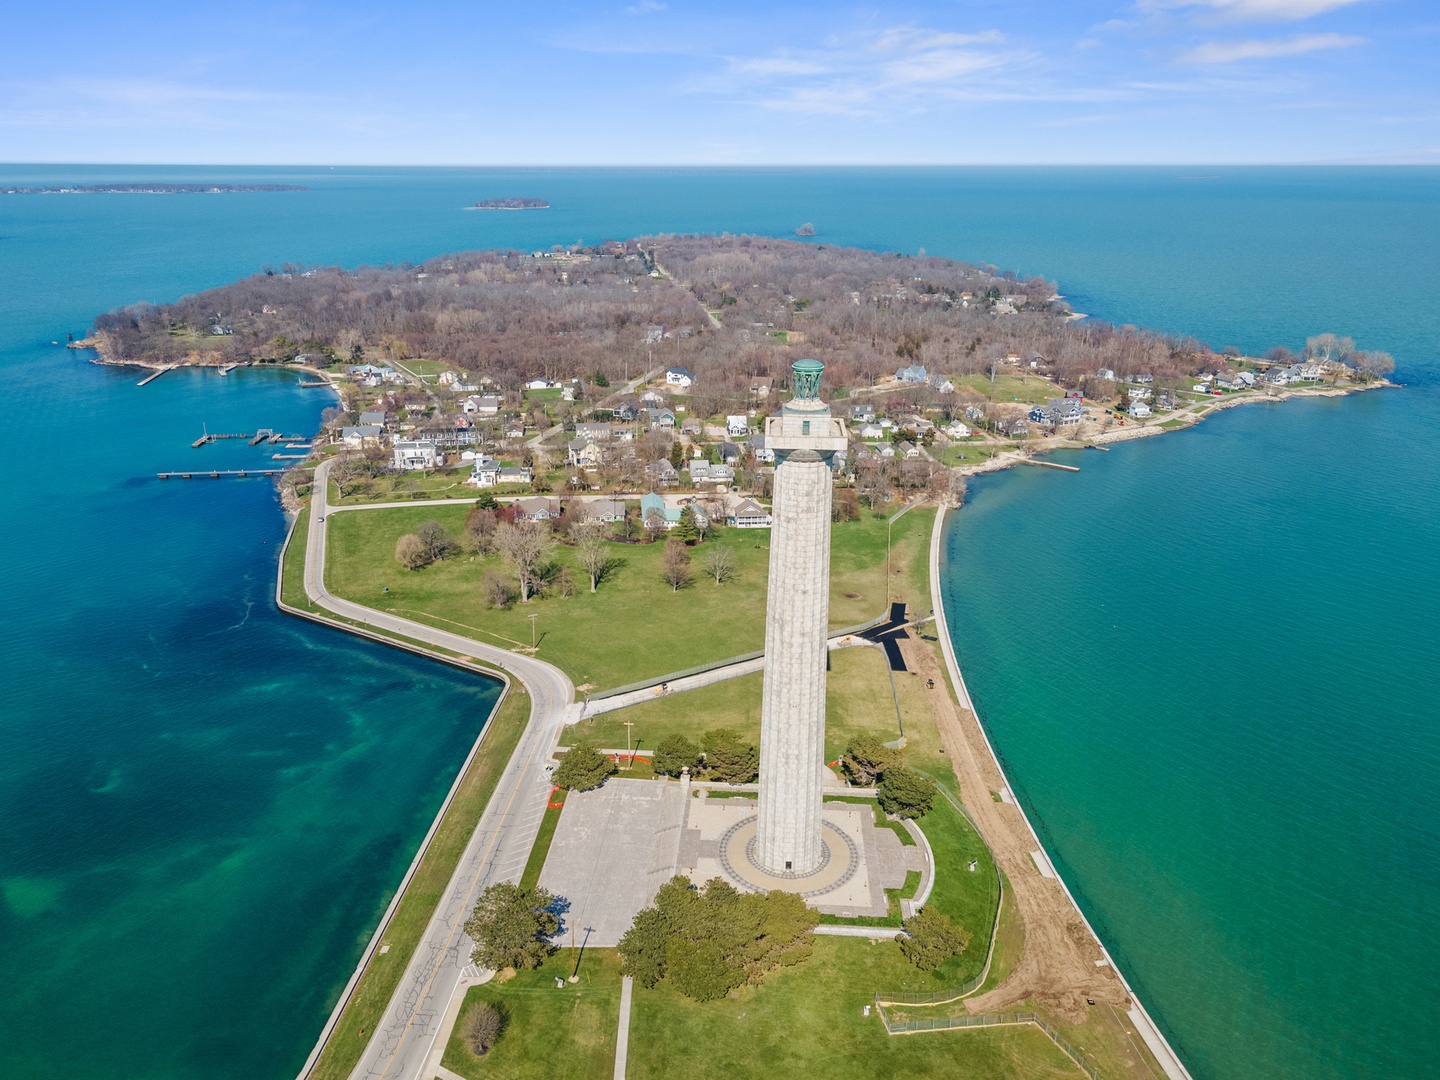 Find your perfect island oasis at Bayshore Resort on Put-in-Bay